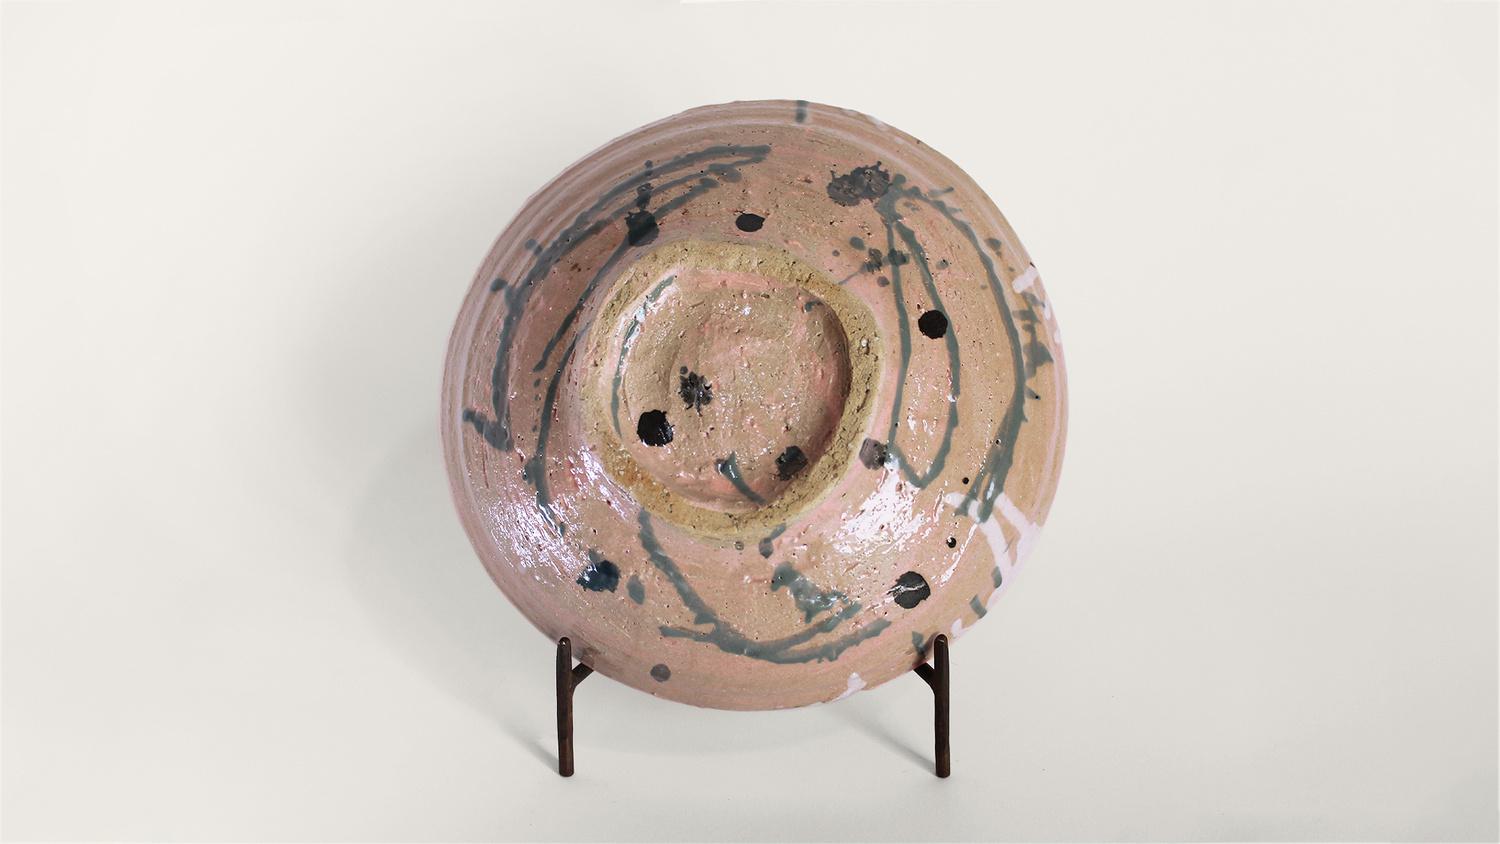 Ø: 26 cm H: 8 cm
Sandstone
Made in Japan
Unique piece
2023

This work comes with a certificate of authenticity.

Shun Kadohashi is a Japanese ceramic artist who lives and works in a small fishing village at the southern tip of the Bosô peninsula in